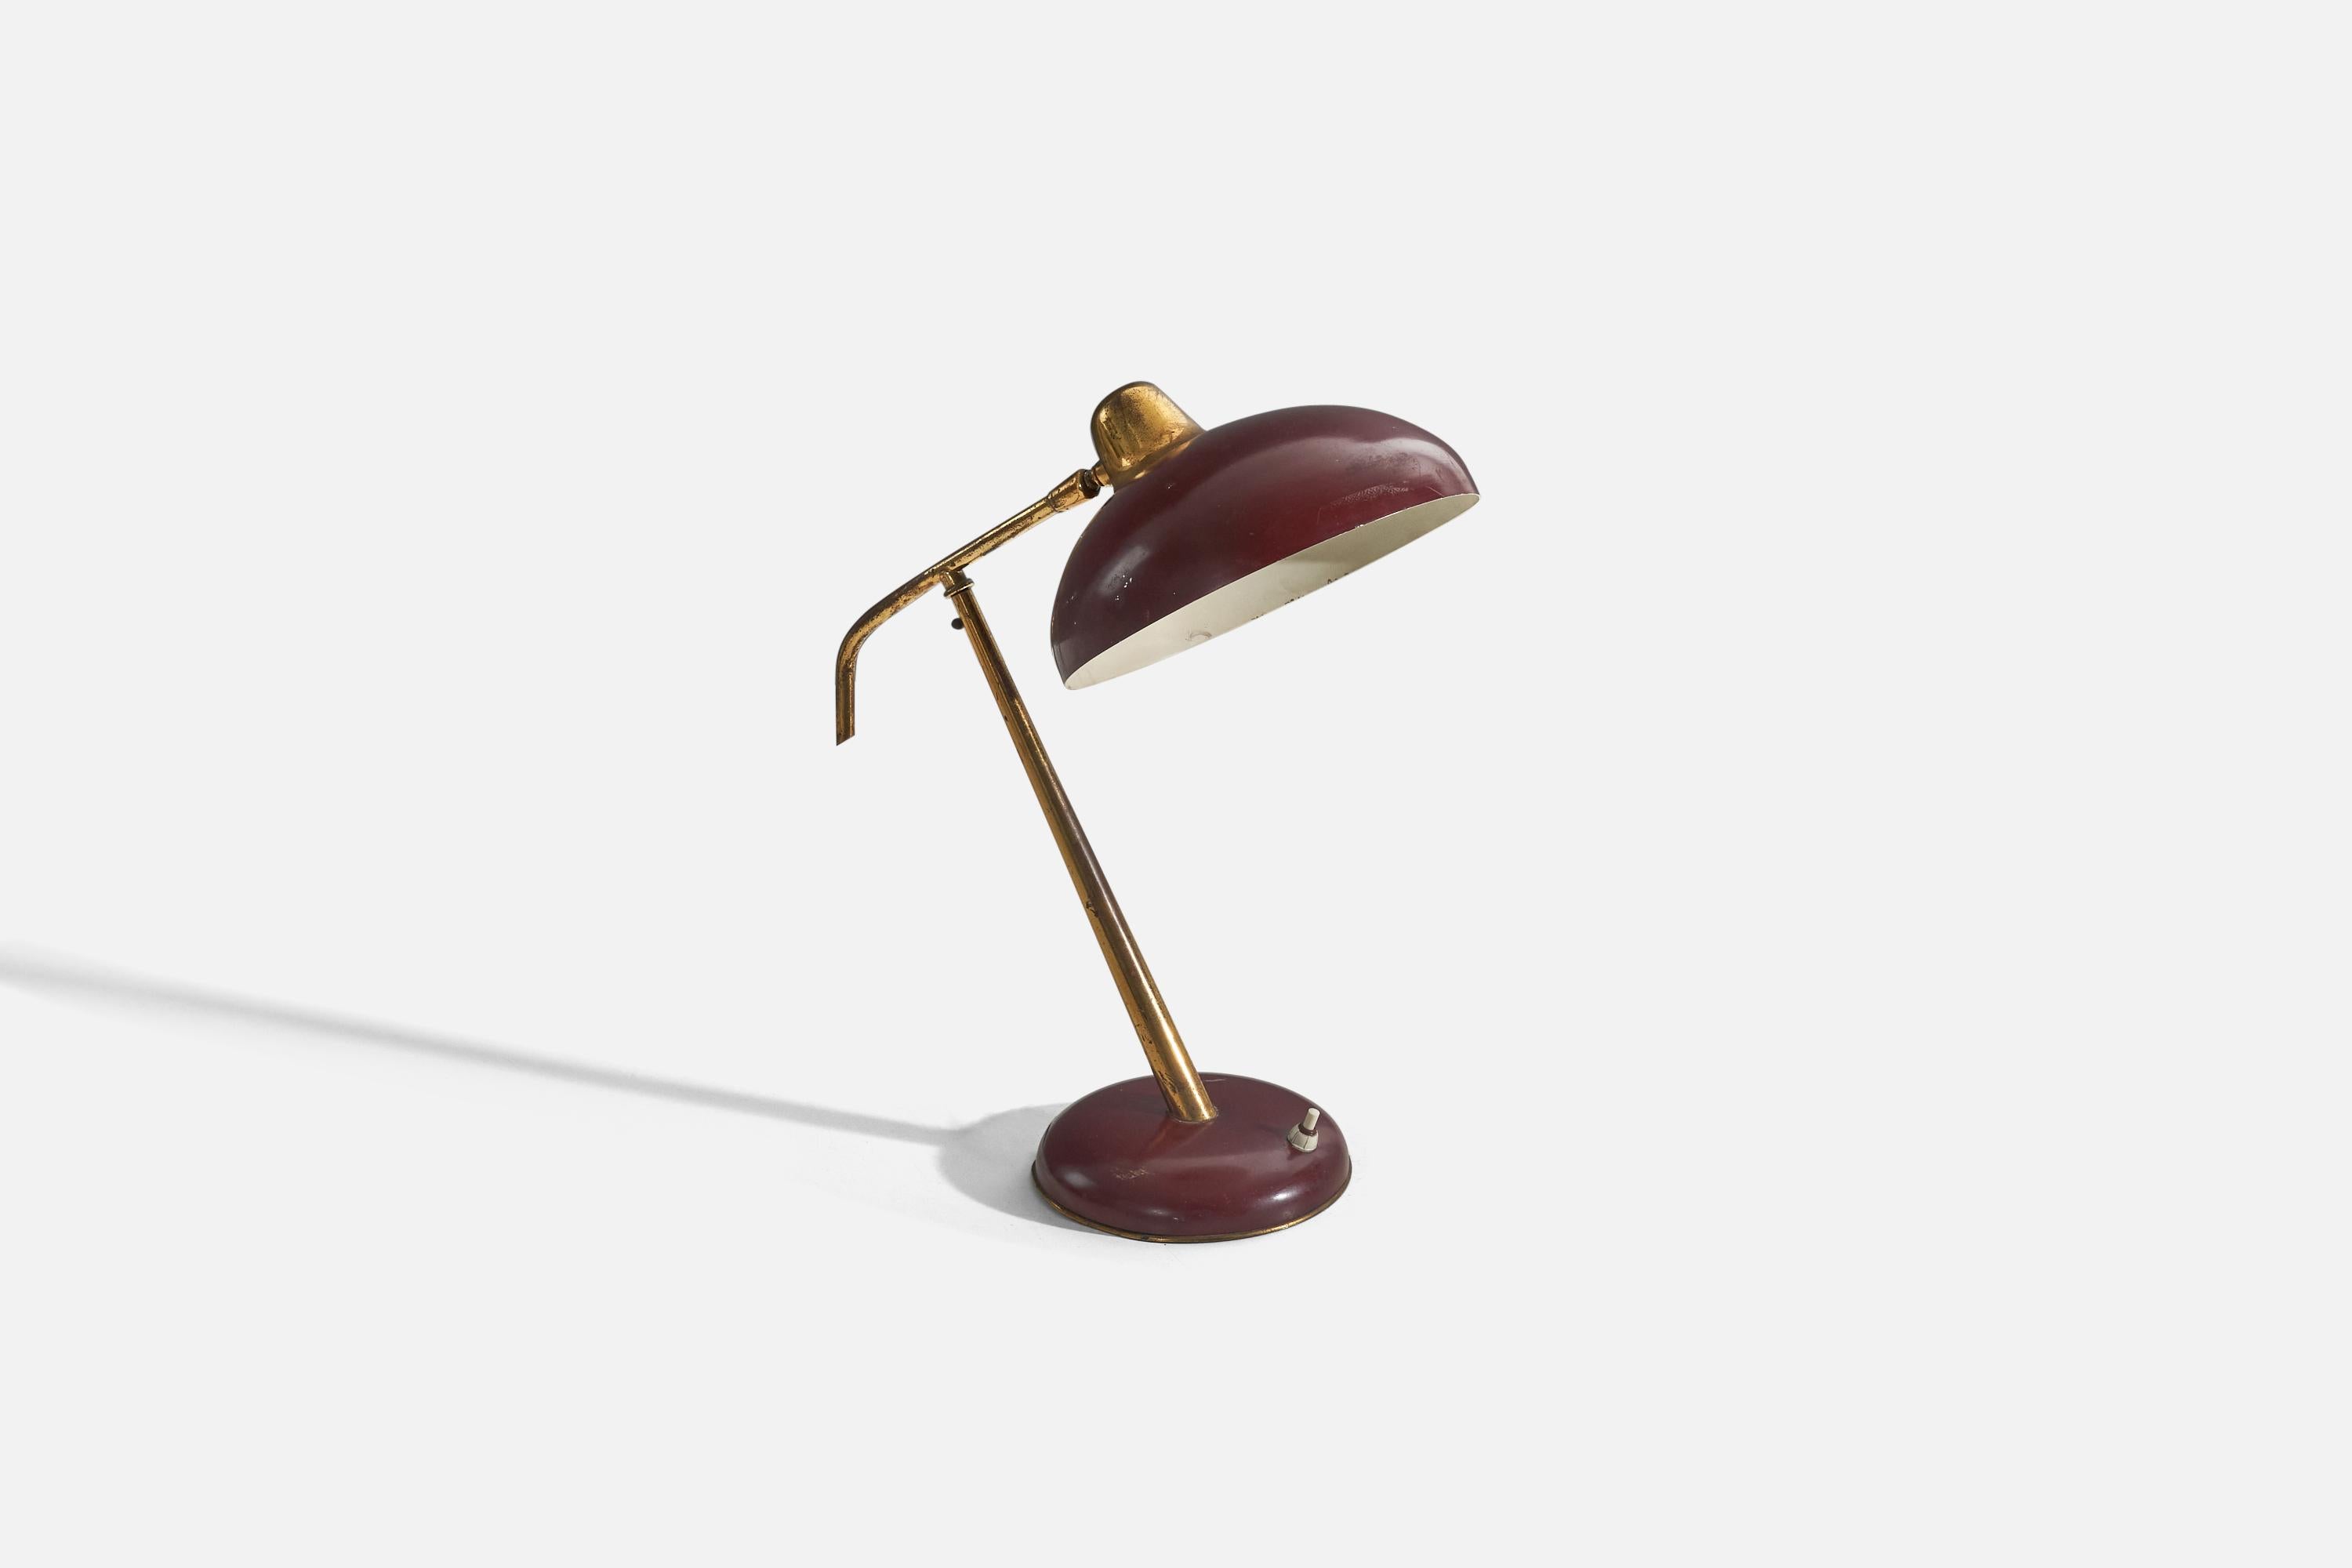 A brass and red metal table lamp designed and produced by an Italian designer, Italy, 1950s.

Variable dimensions, measured as illustrated in the first image.